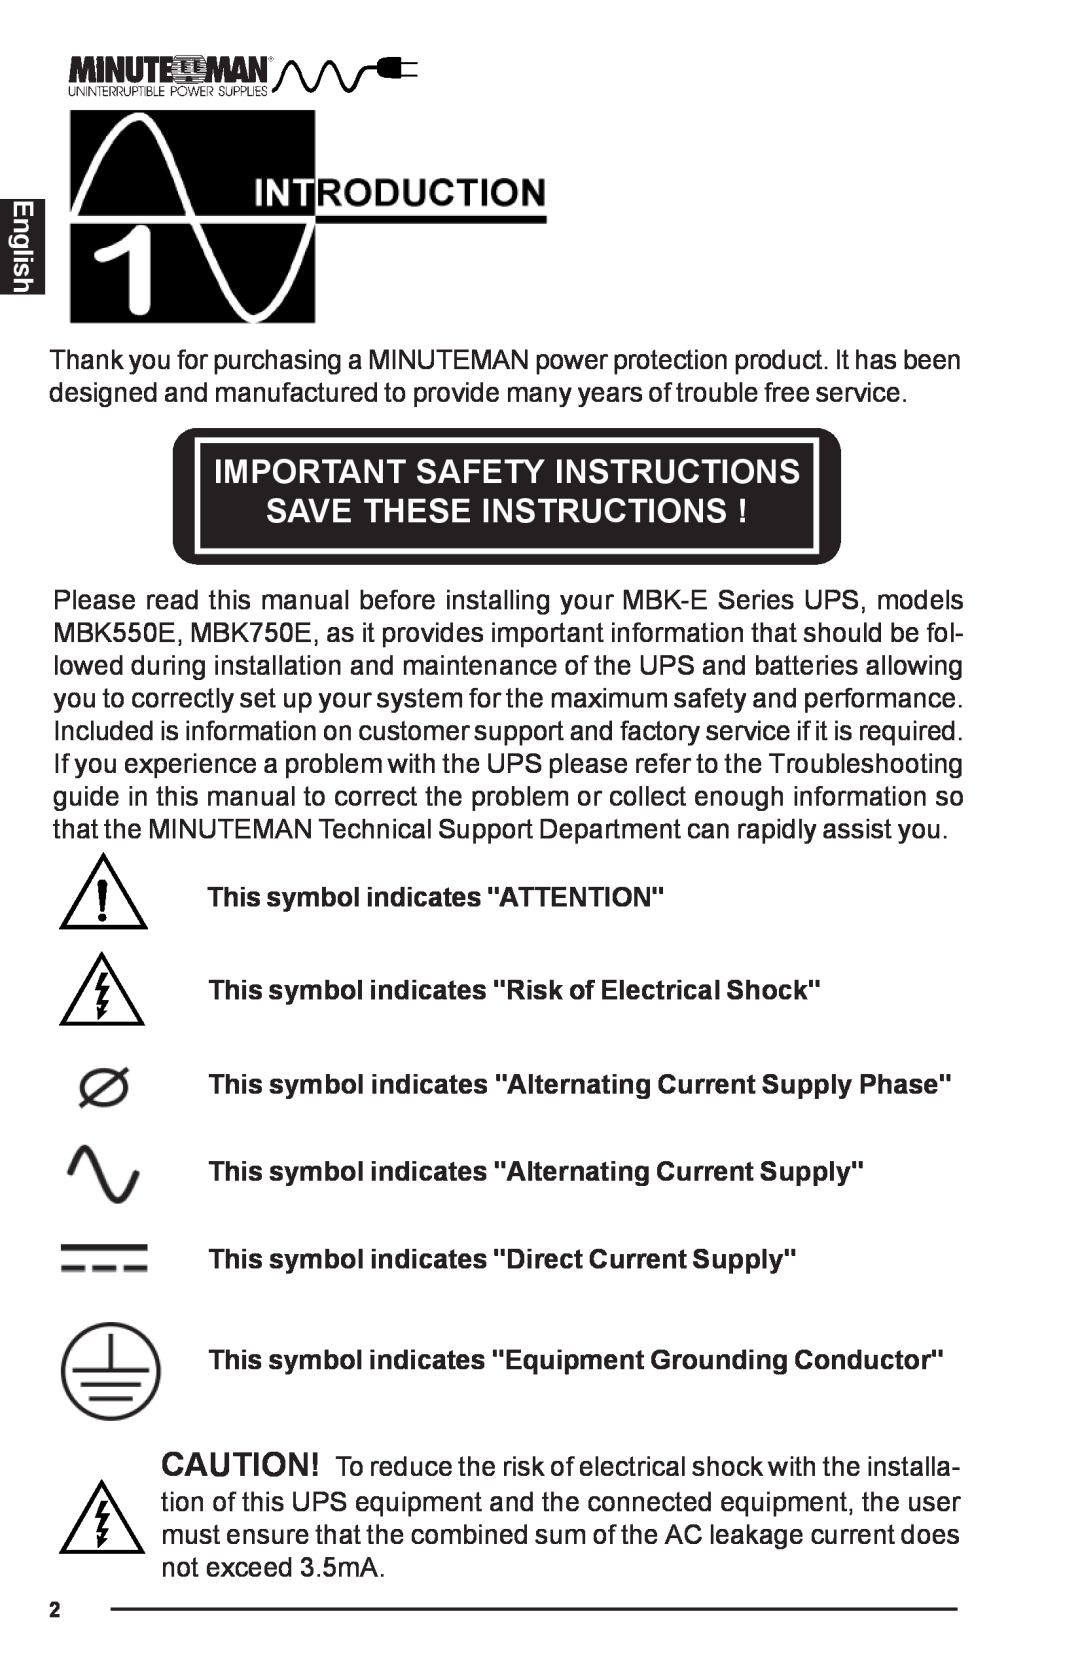 Minuteman UPS MBK-E SERIES Important Safety Instructions Save These Instructions, English, This symbol indicates ATTENTION 